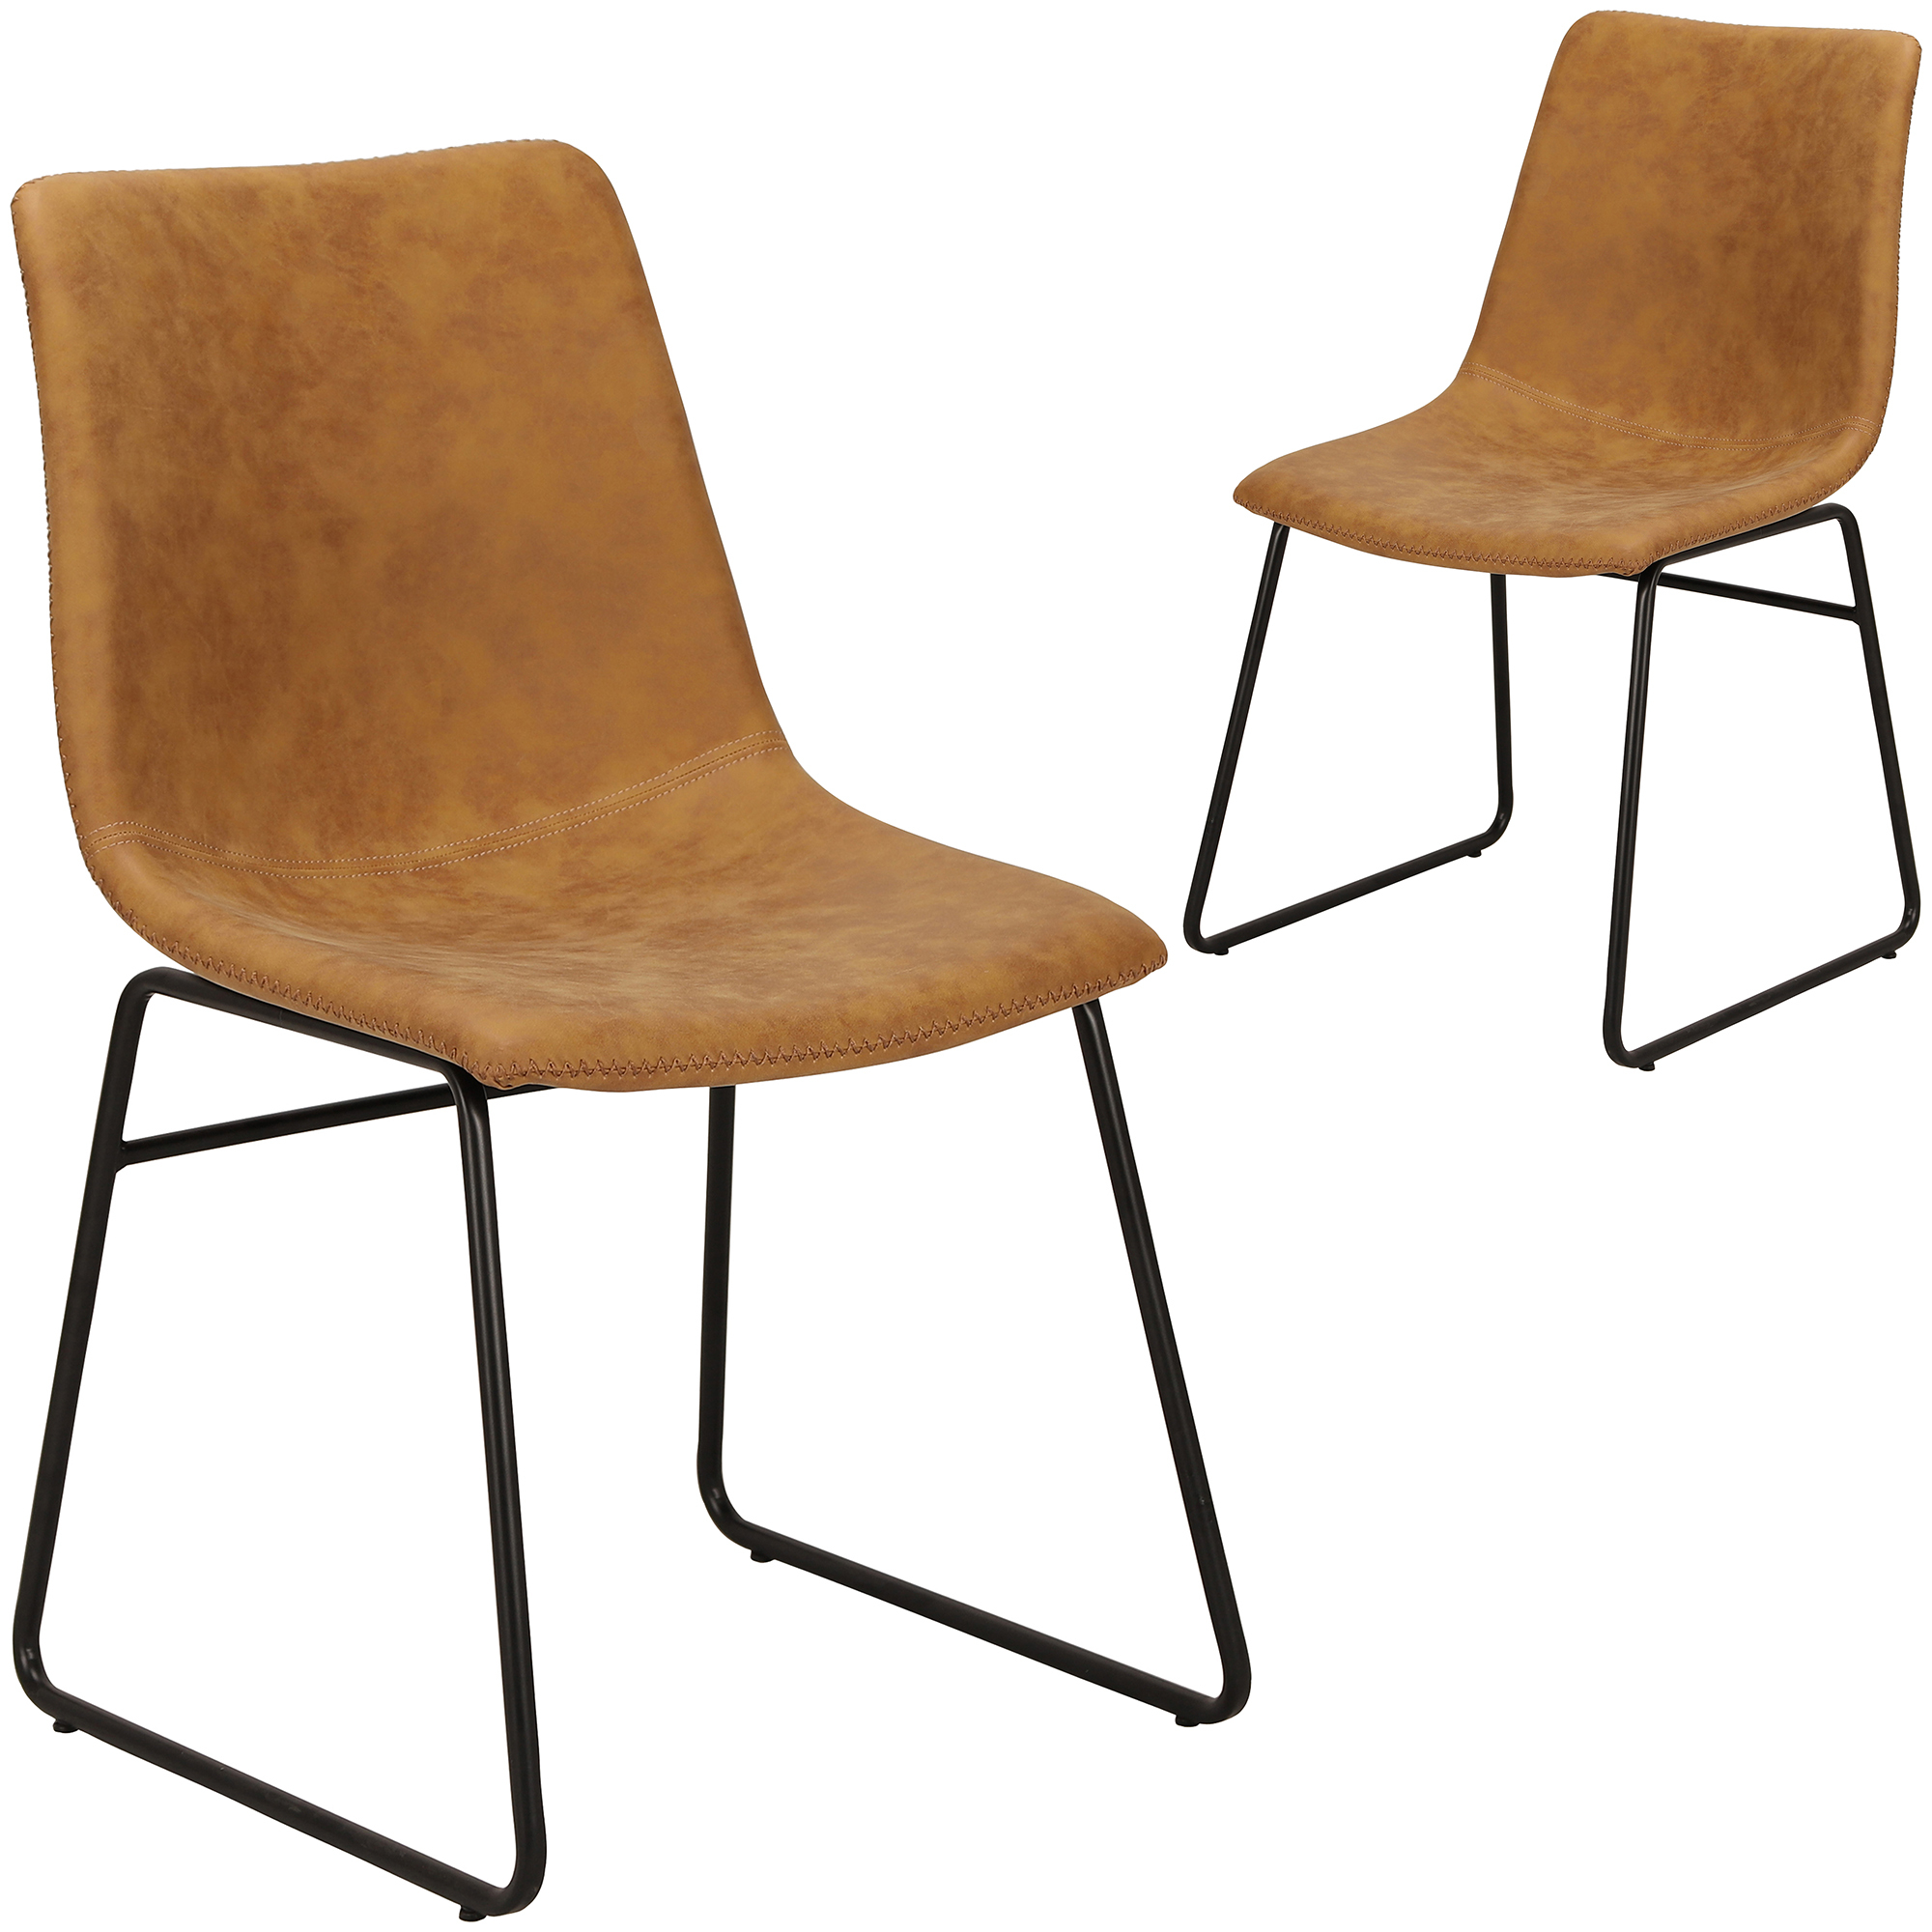 Estudio Furniture Regus Faux Leather, Faux Leather Dining Chairs With Metal Legs